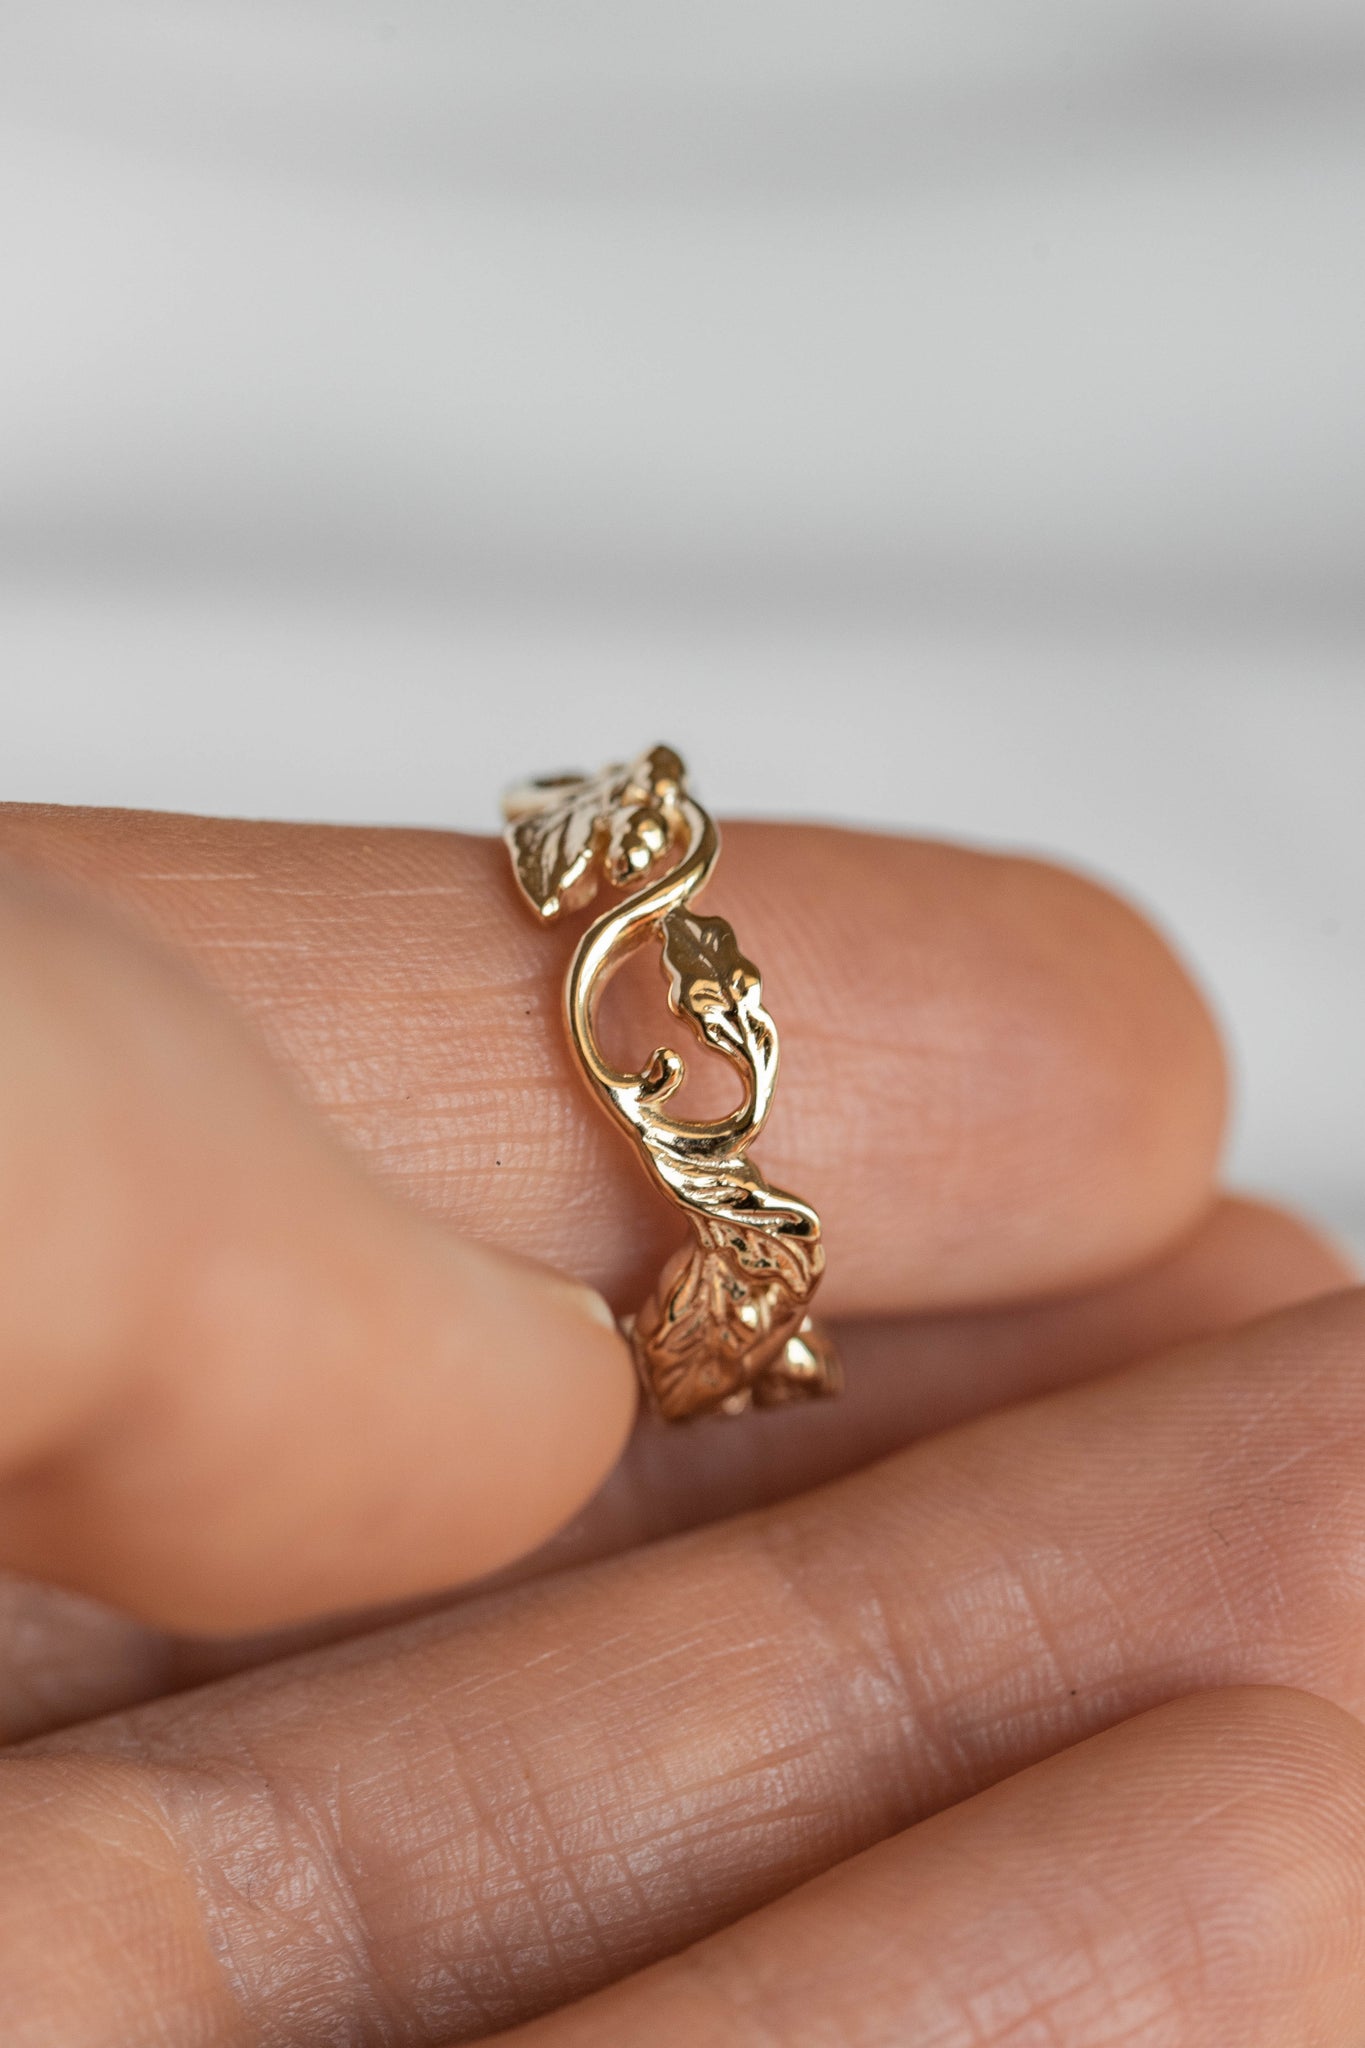 READY TO SHIP: Oak leaves and acorns wedding ring in 14K yellow gold, AVAILABLE RING SIZES - 5.5, 8.5 US - Eden Garden Jewelry™